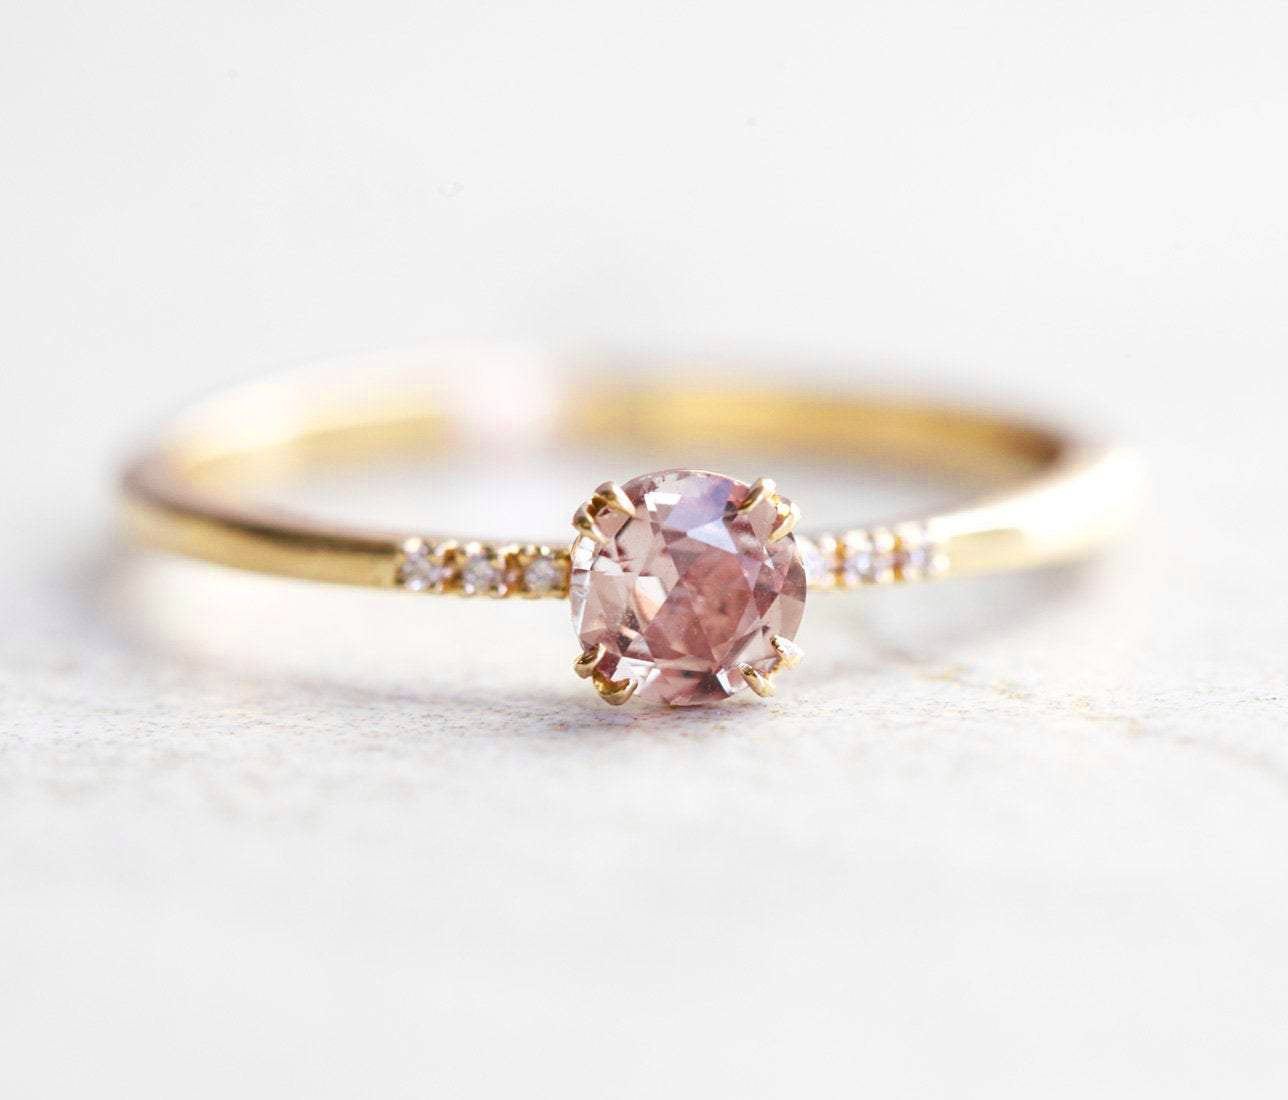 Round champagne-colored sapphire ring with side diamonds